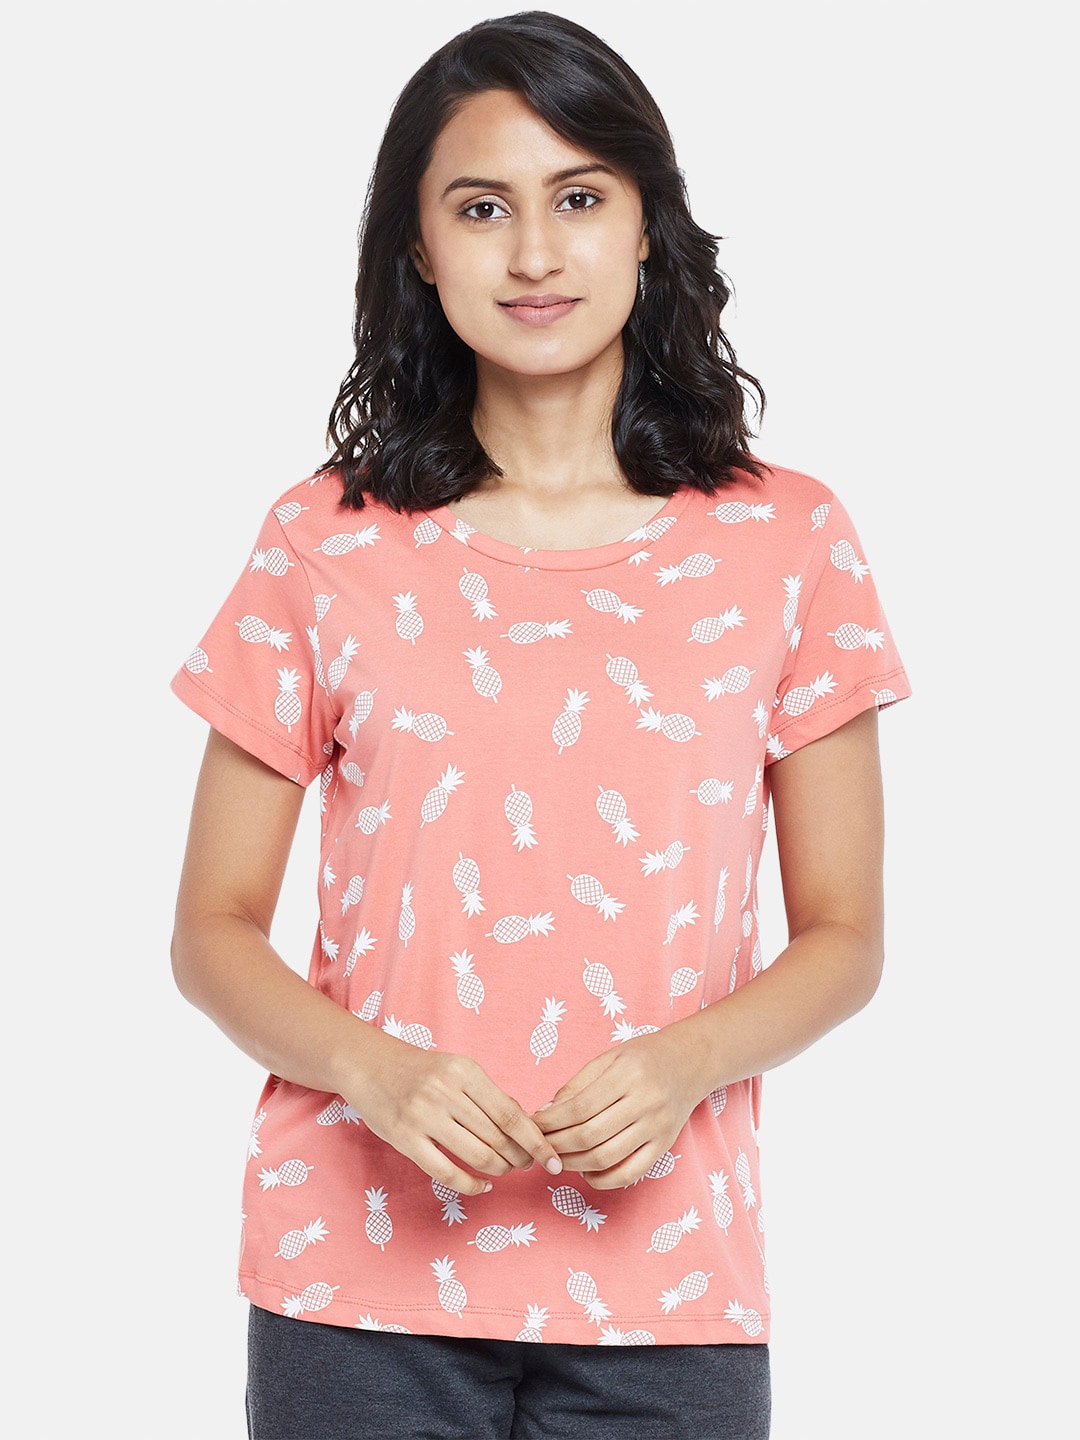 Dreamz by Pantaloons Women Pink & White Printed Cotton Lounge T-shirt Price in India